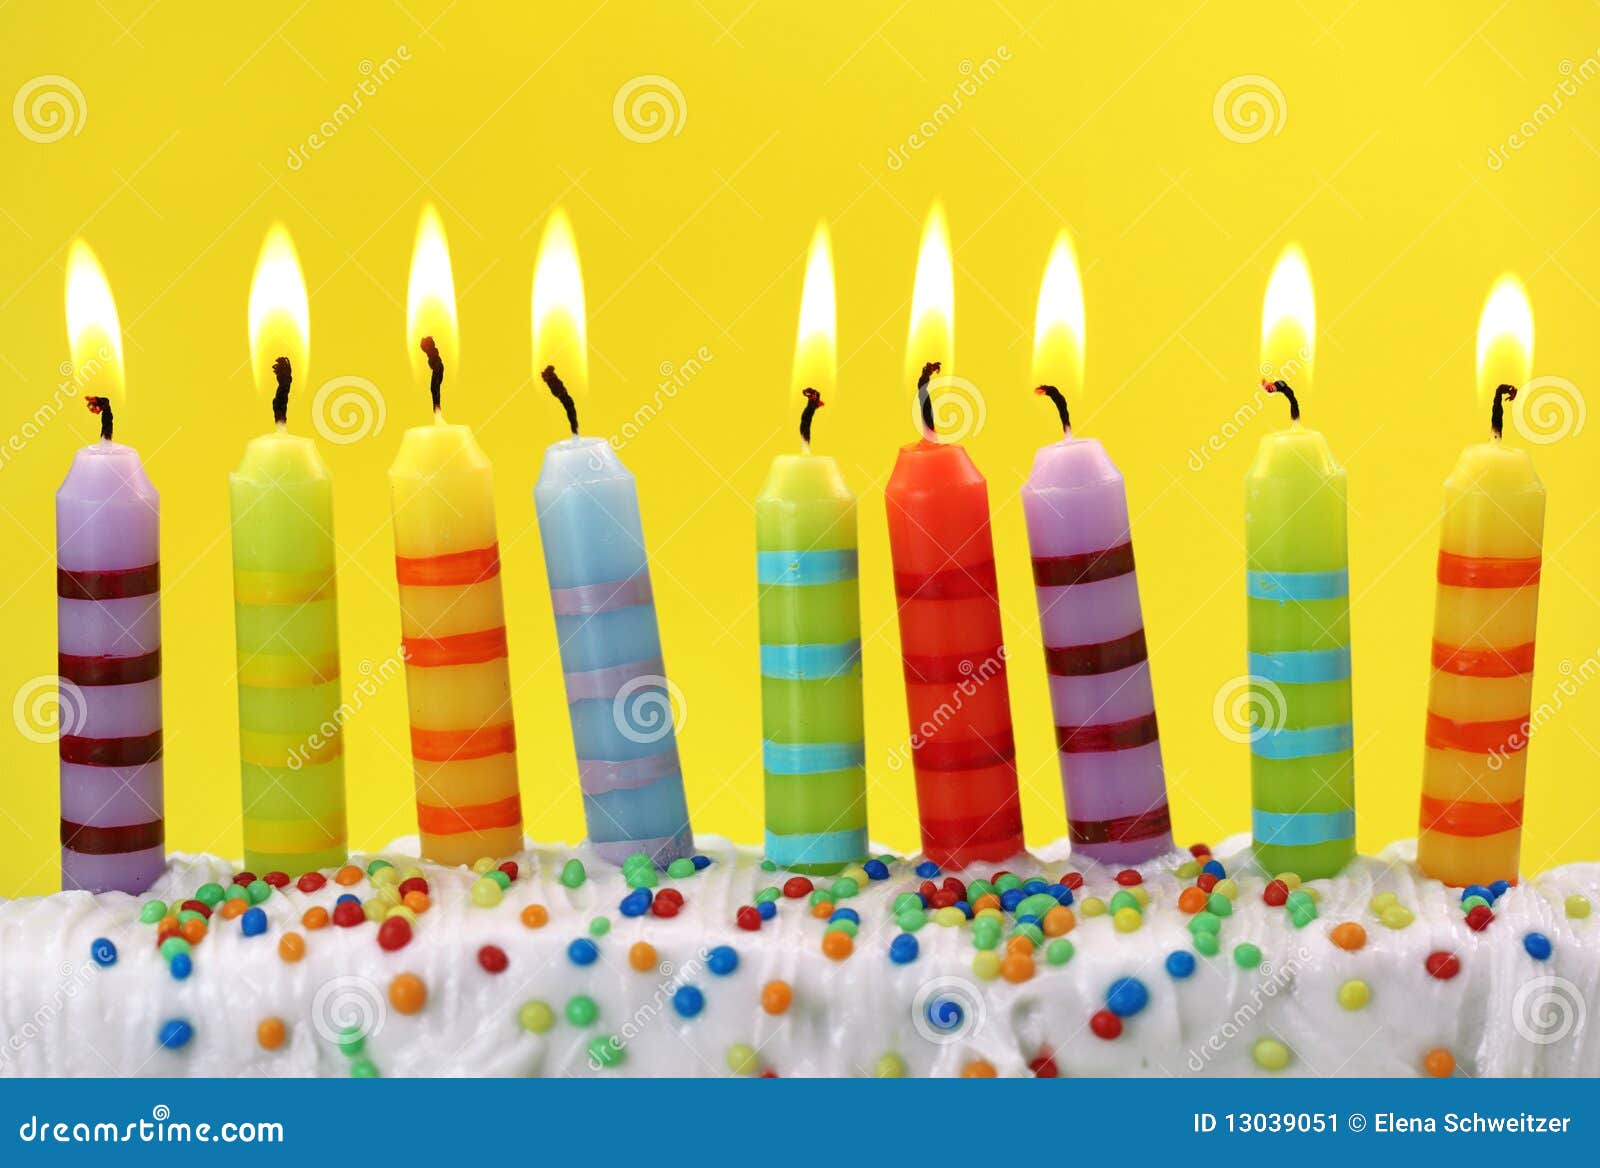 Colorful birthday candles stock image. Image of party - 13039051